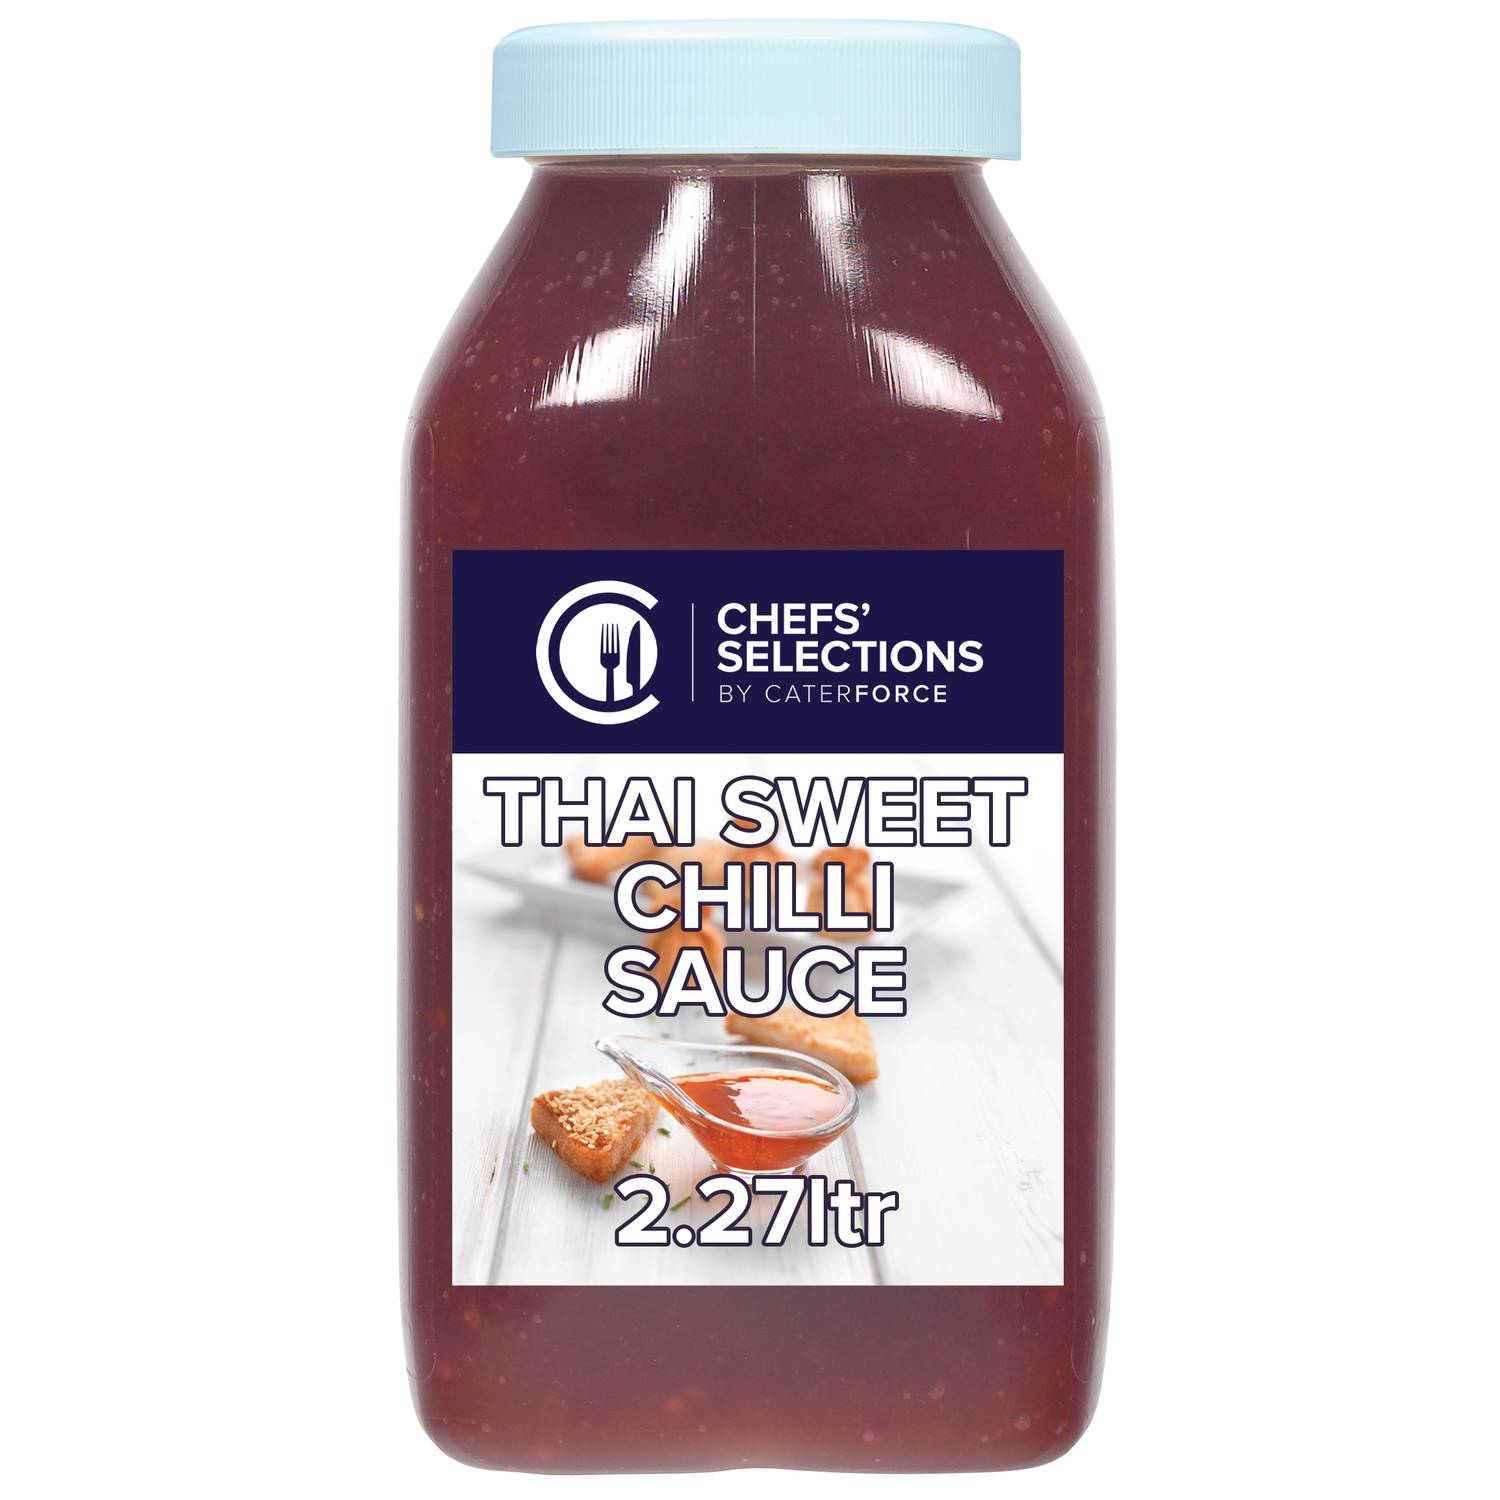 Chefs’ Selections Thai Sweet Chilli Sauce (2 x 2.27L)